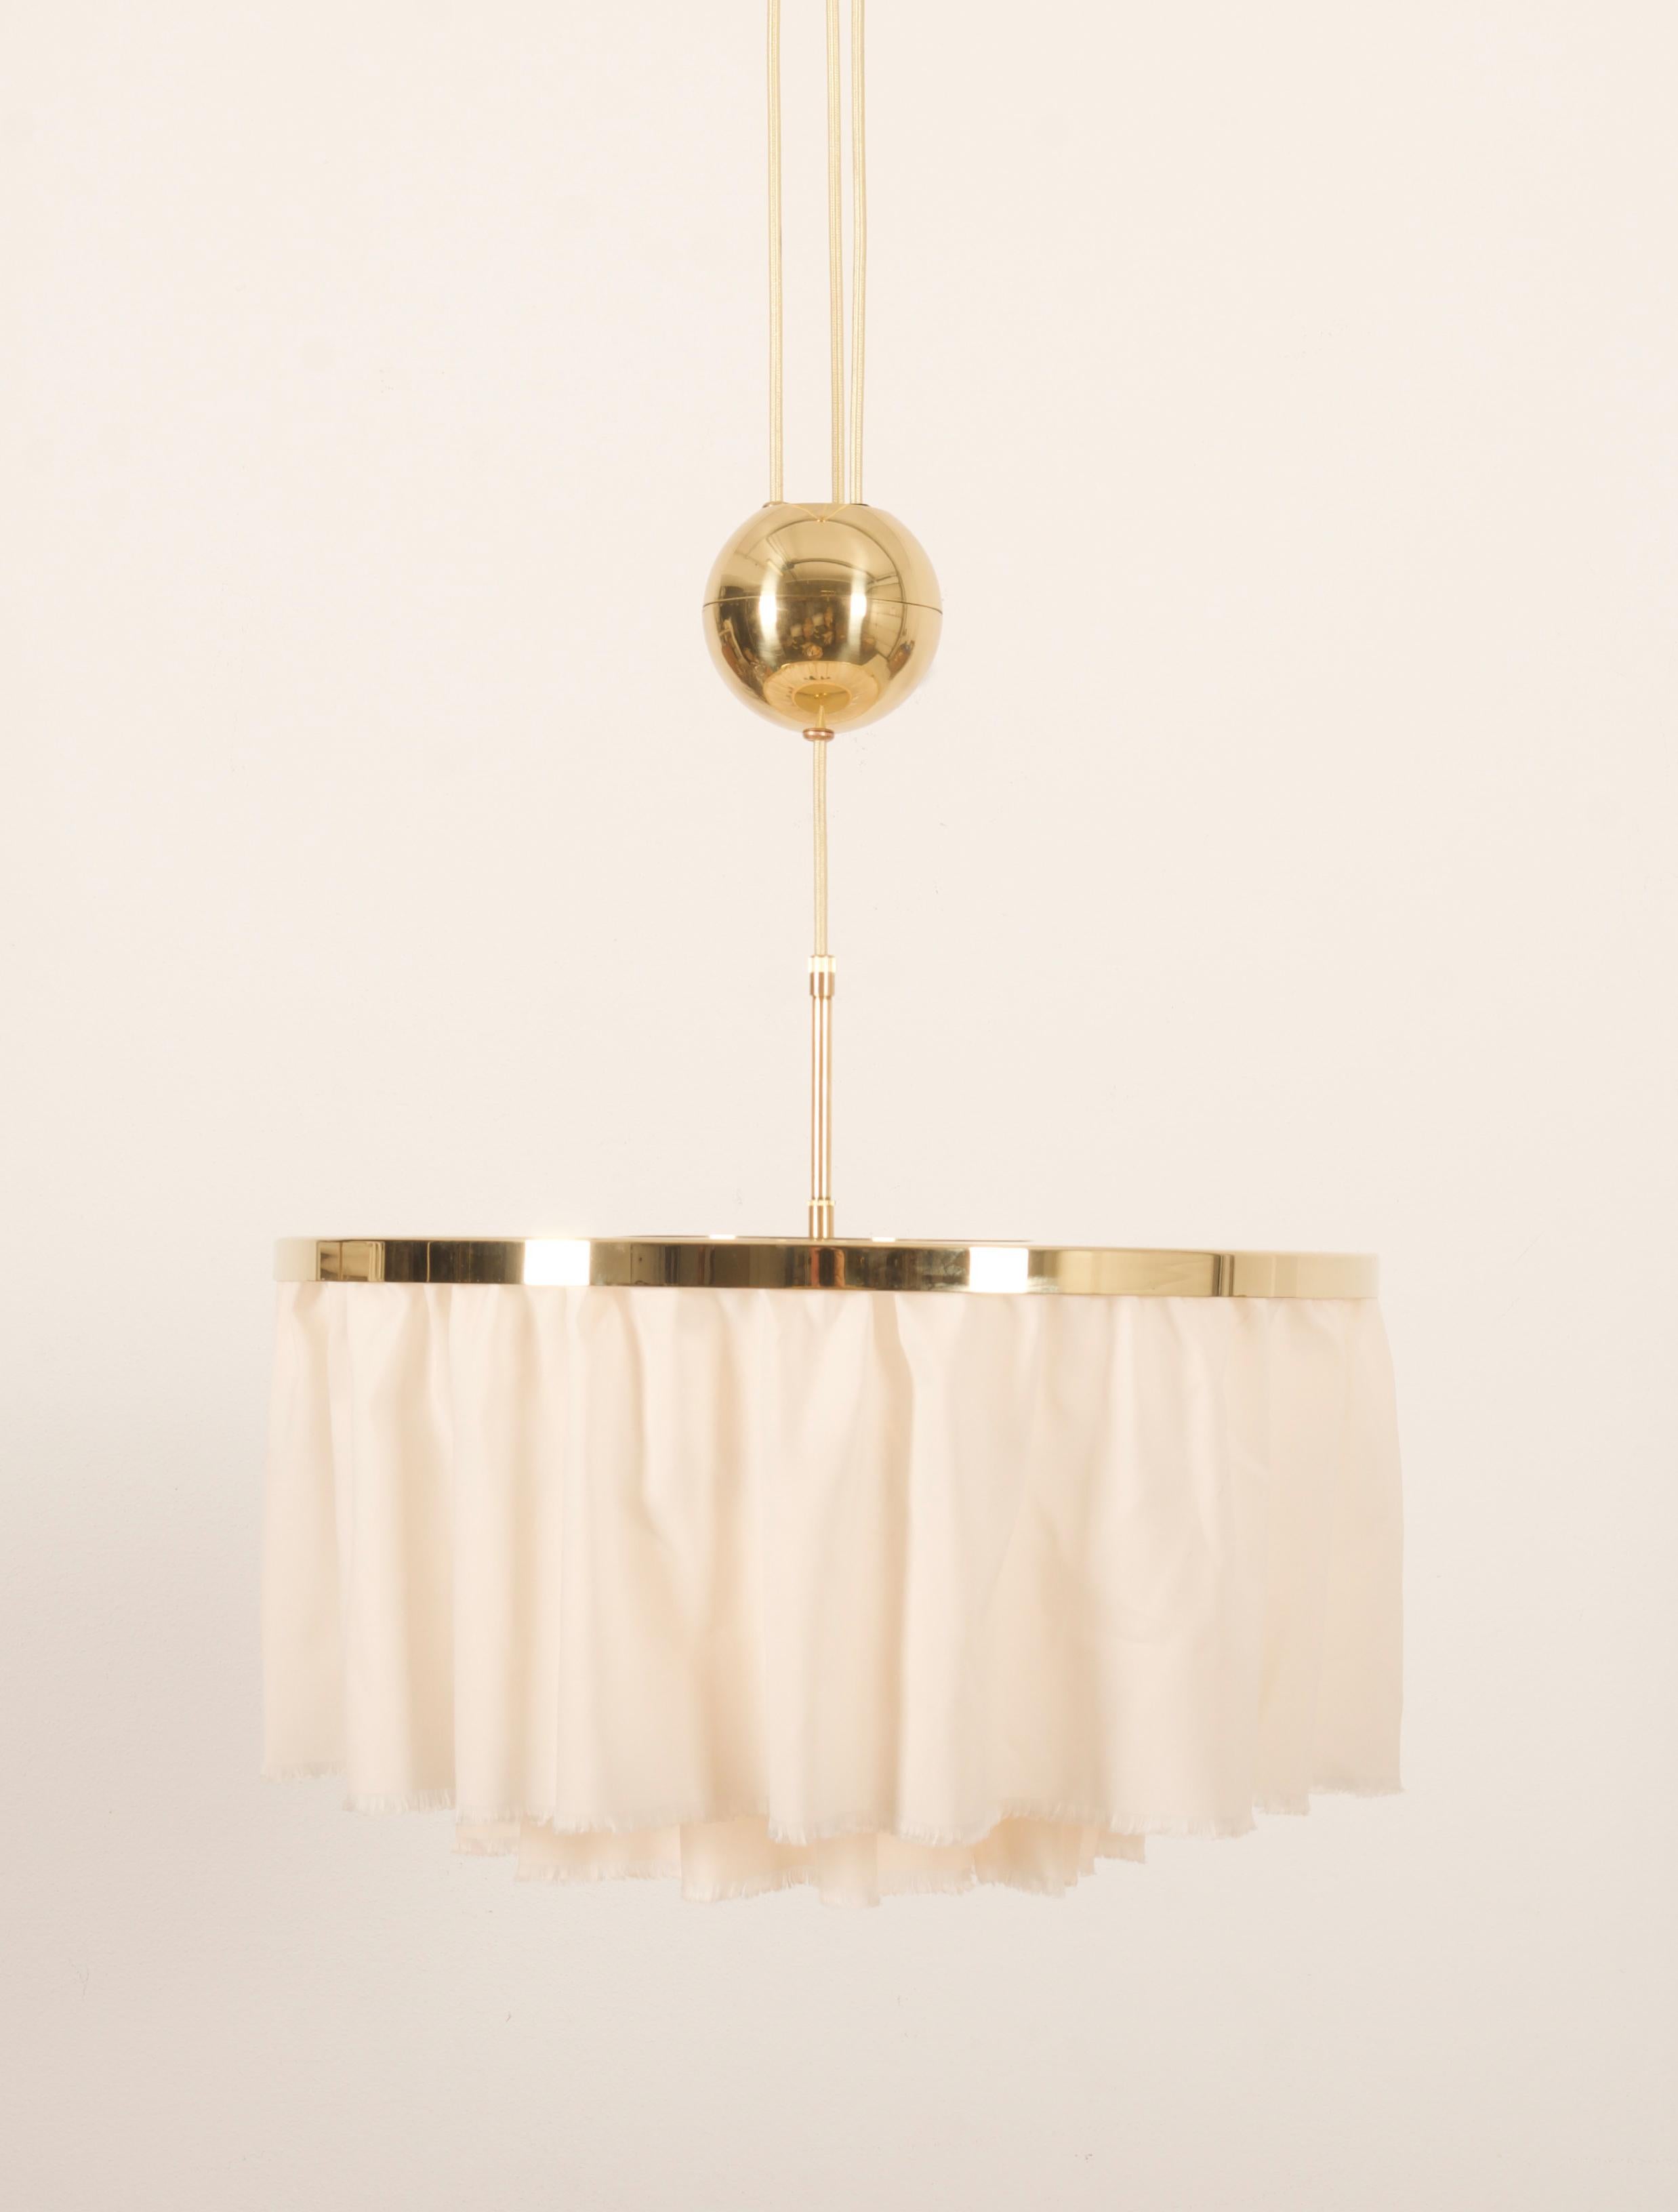 Vienna Secession Counterweight Silk Pendant Lamp by J.T. Kalmar Designed by Adolf Loos For Sale